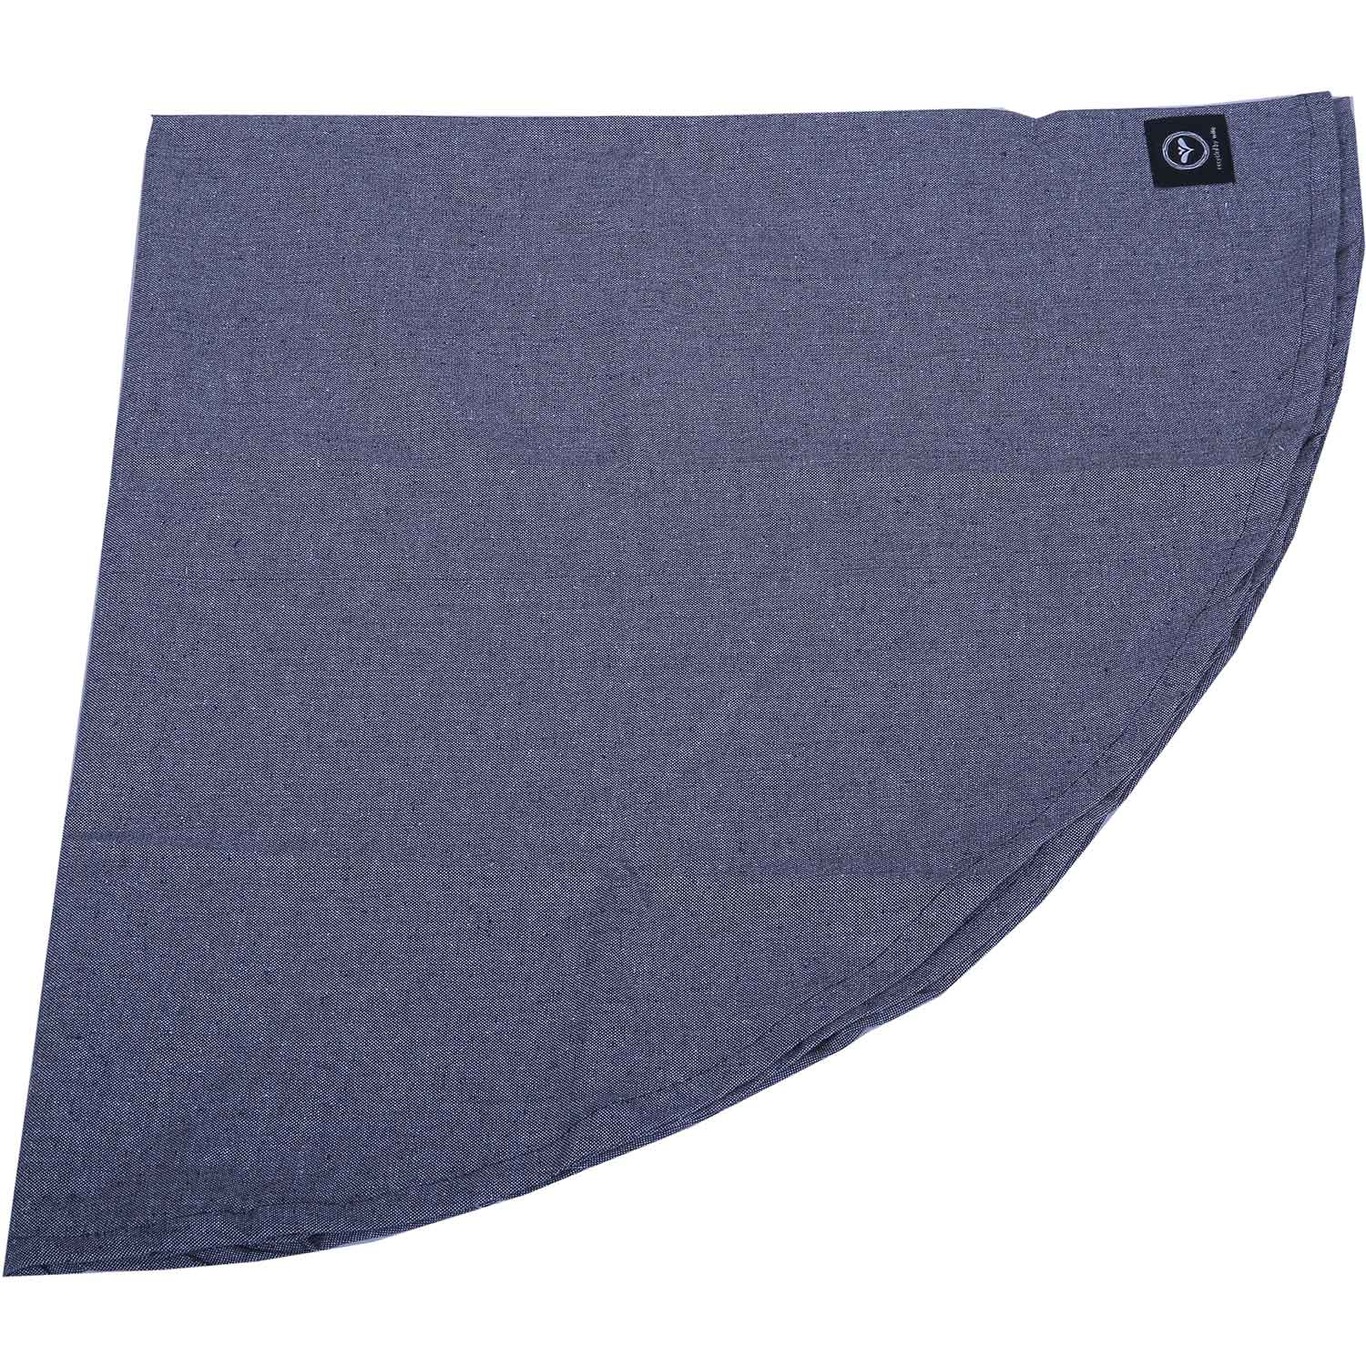 Hedvig Table Cloth Treated 160 cm Round Chambray, Navy / White